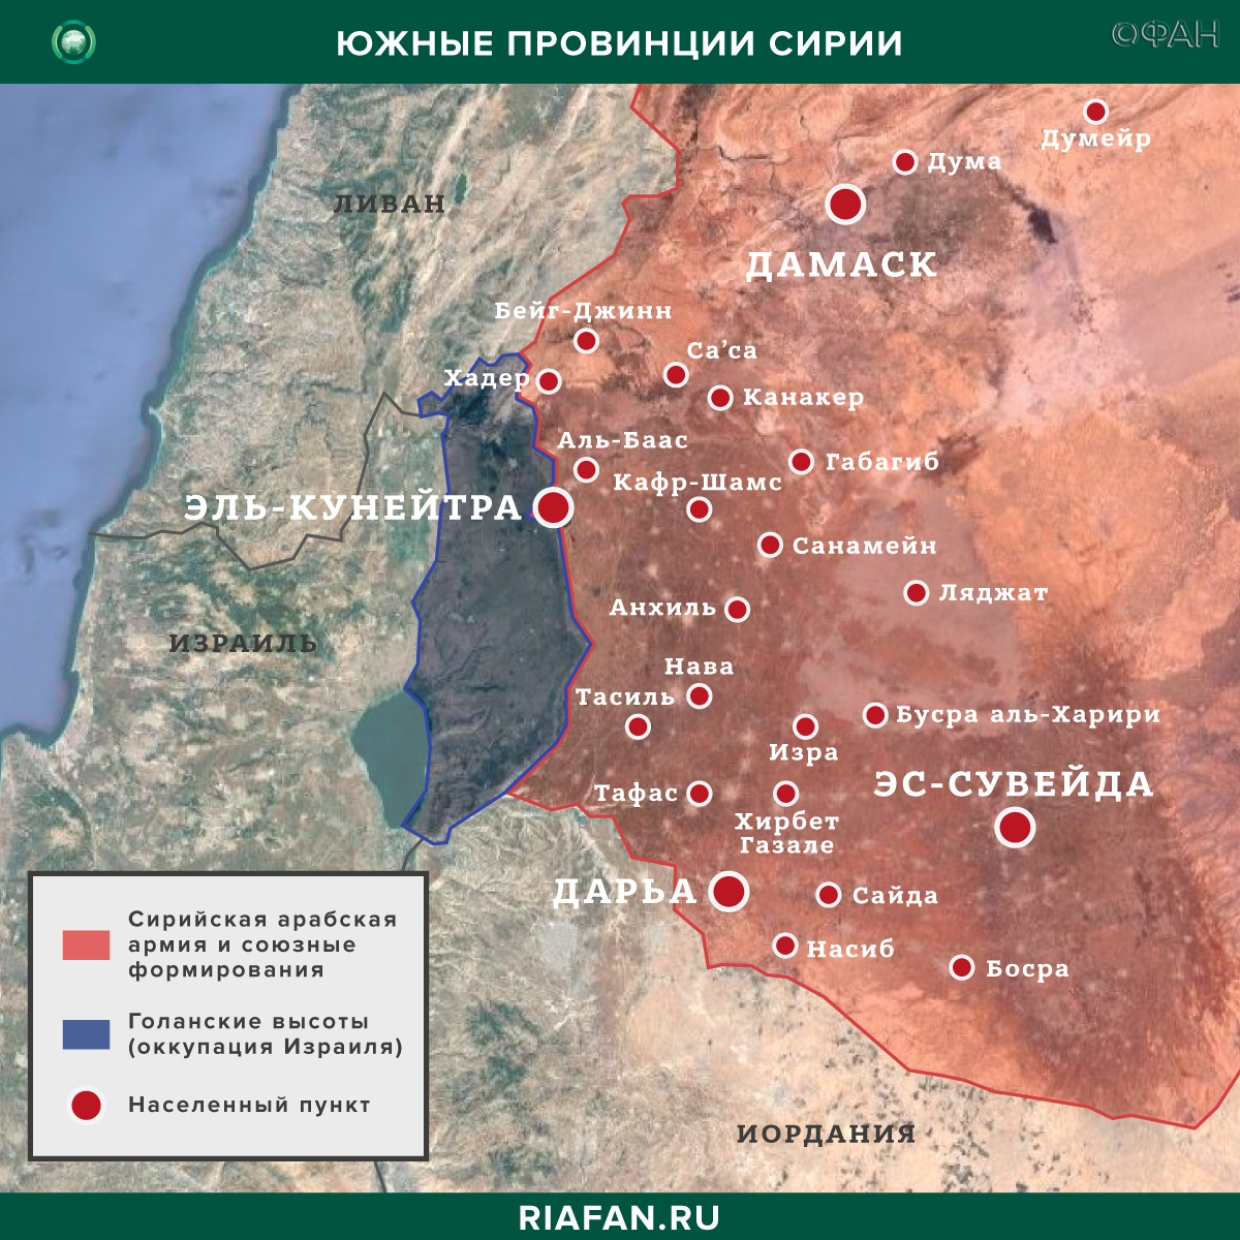 Syria news 1 Martha 07.00: CAA has deployed reinforcements to Idlib, The United States is amassing equipment to oil-rich areas of the Syrian Arab Republic